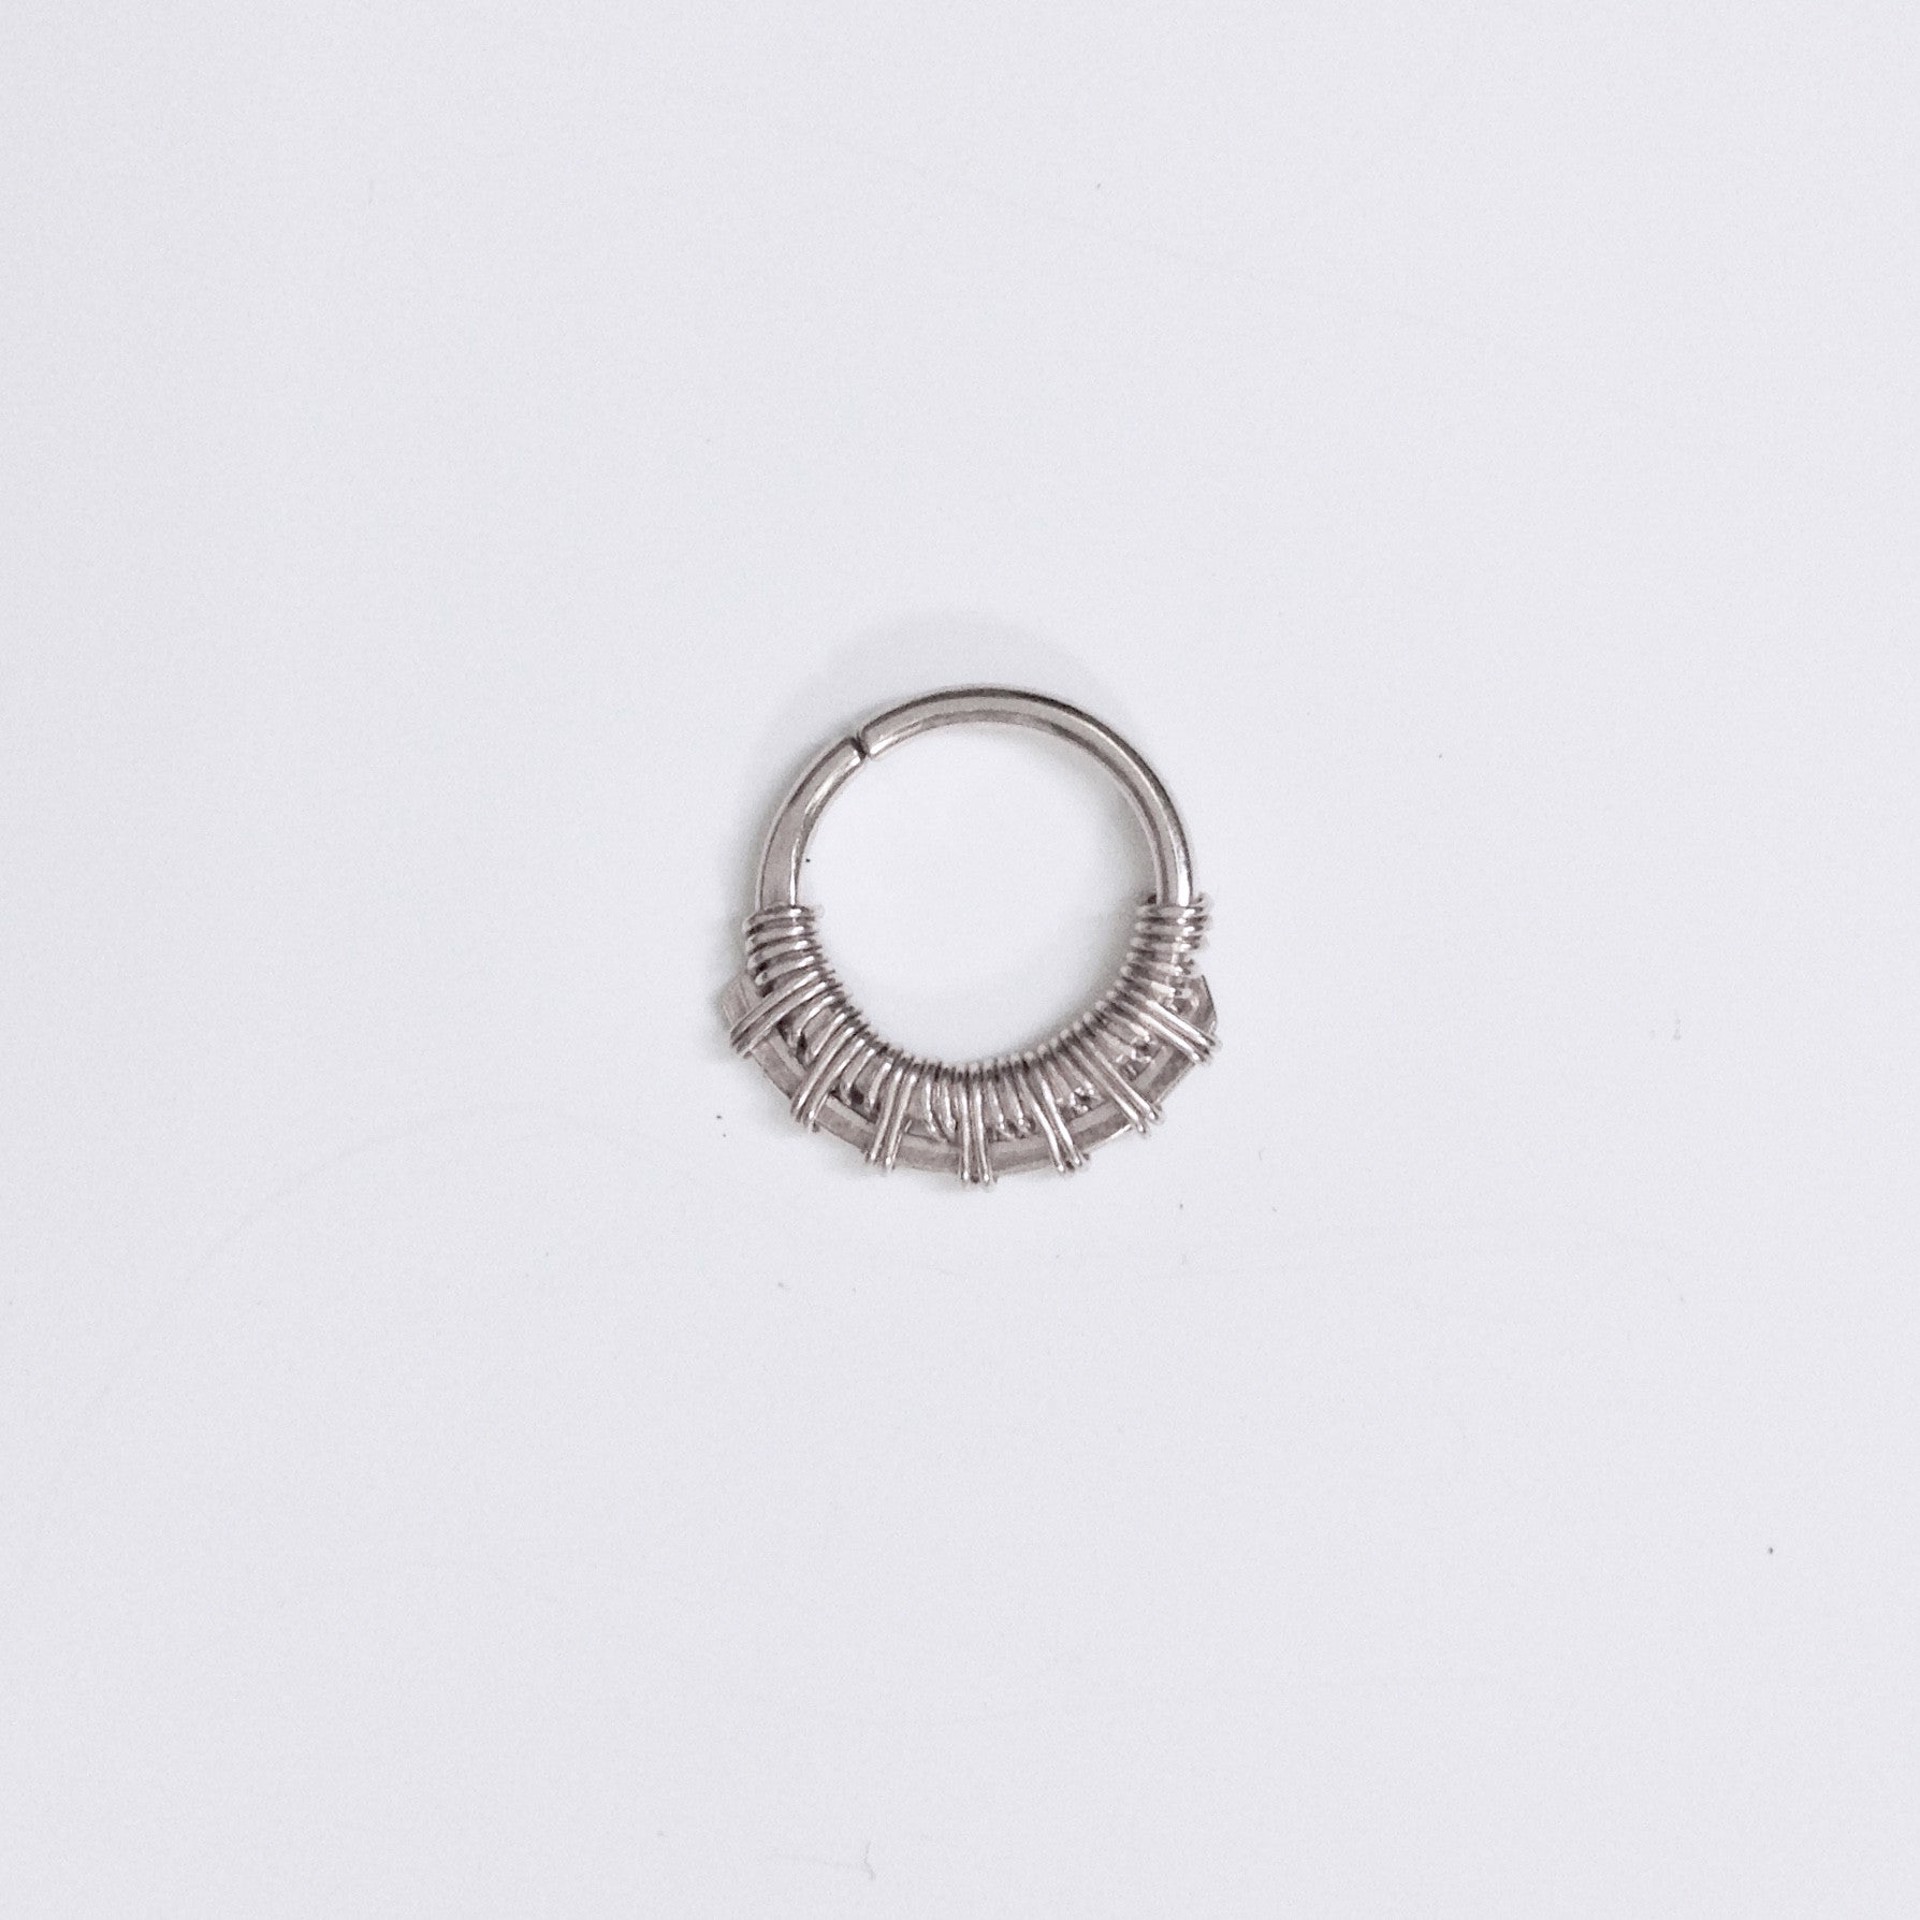 Sundara Septum Ring- Silver - 6mm / 20 by Clementine & Co. Jewelry